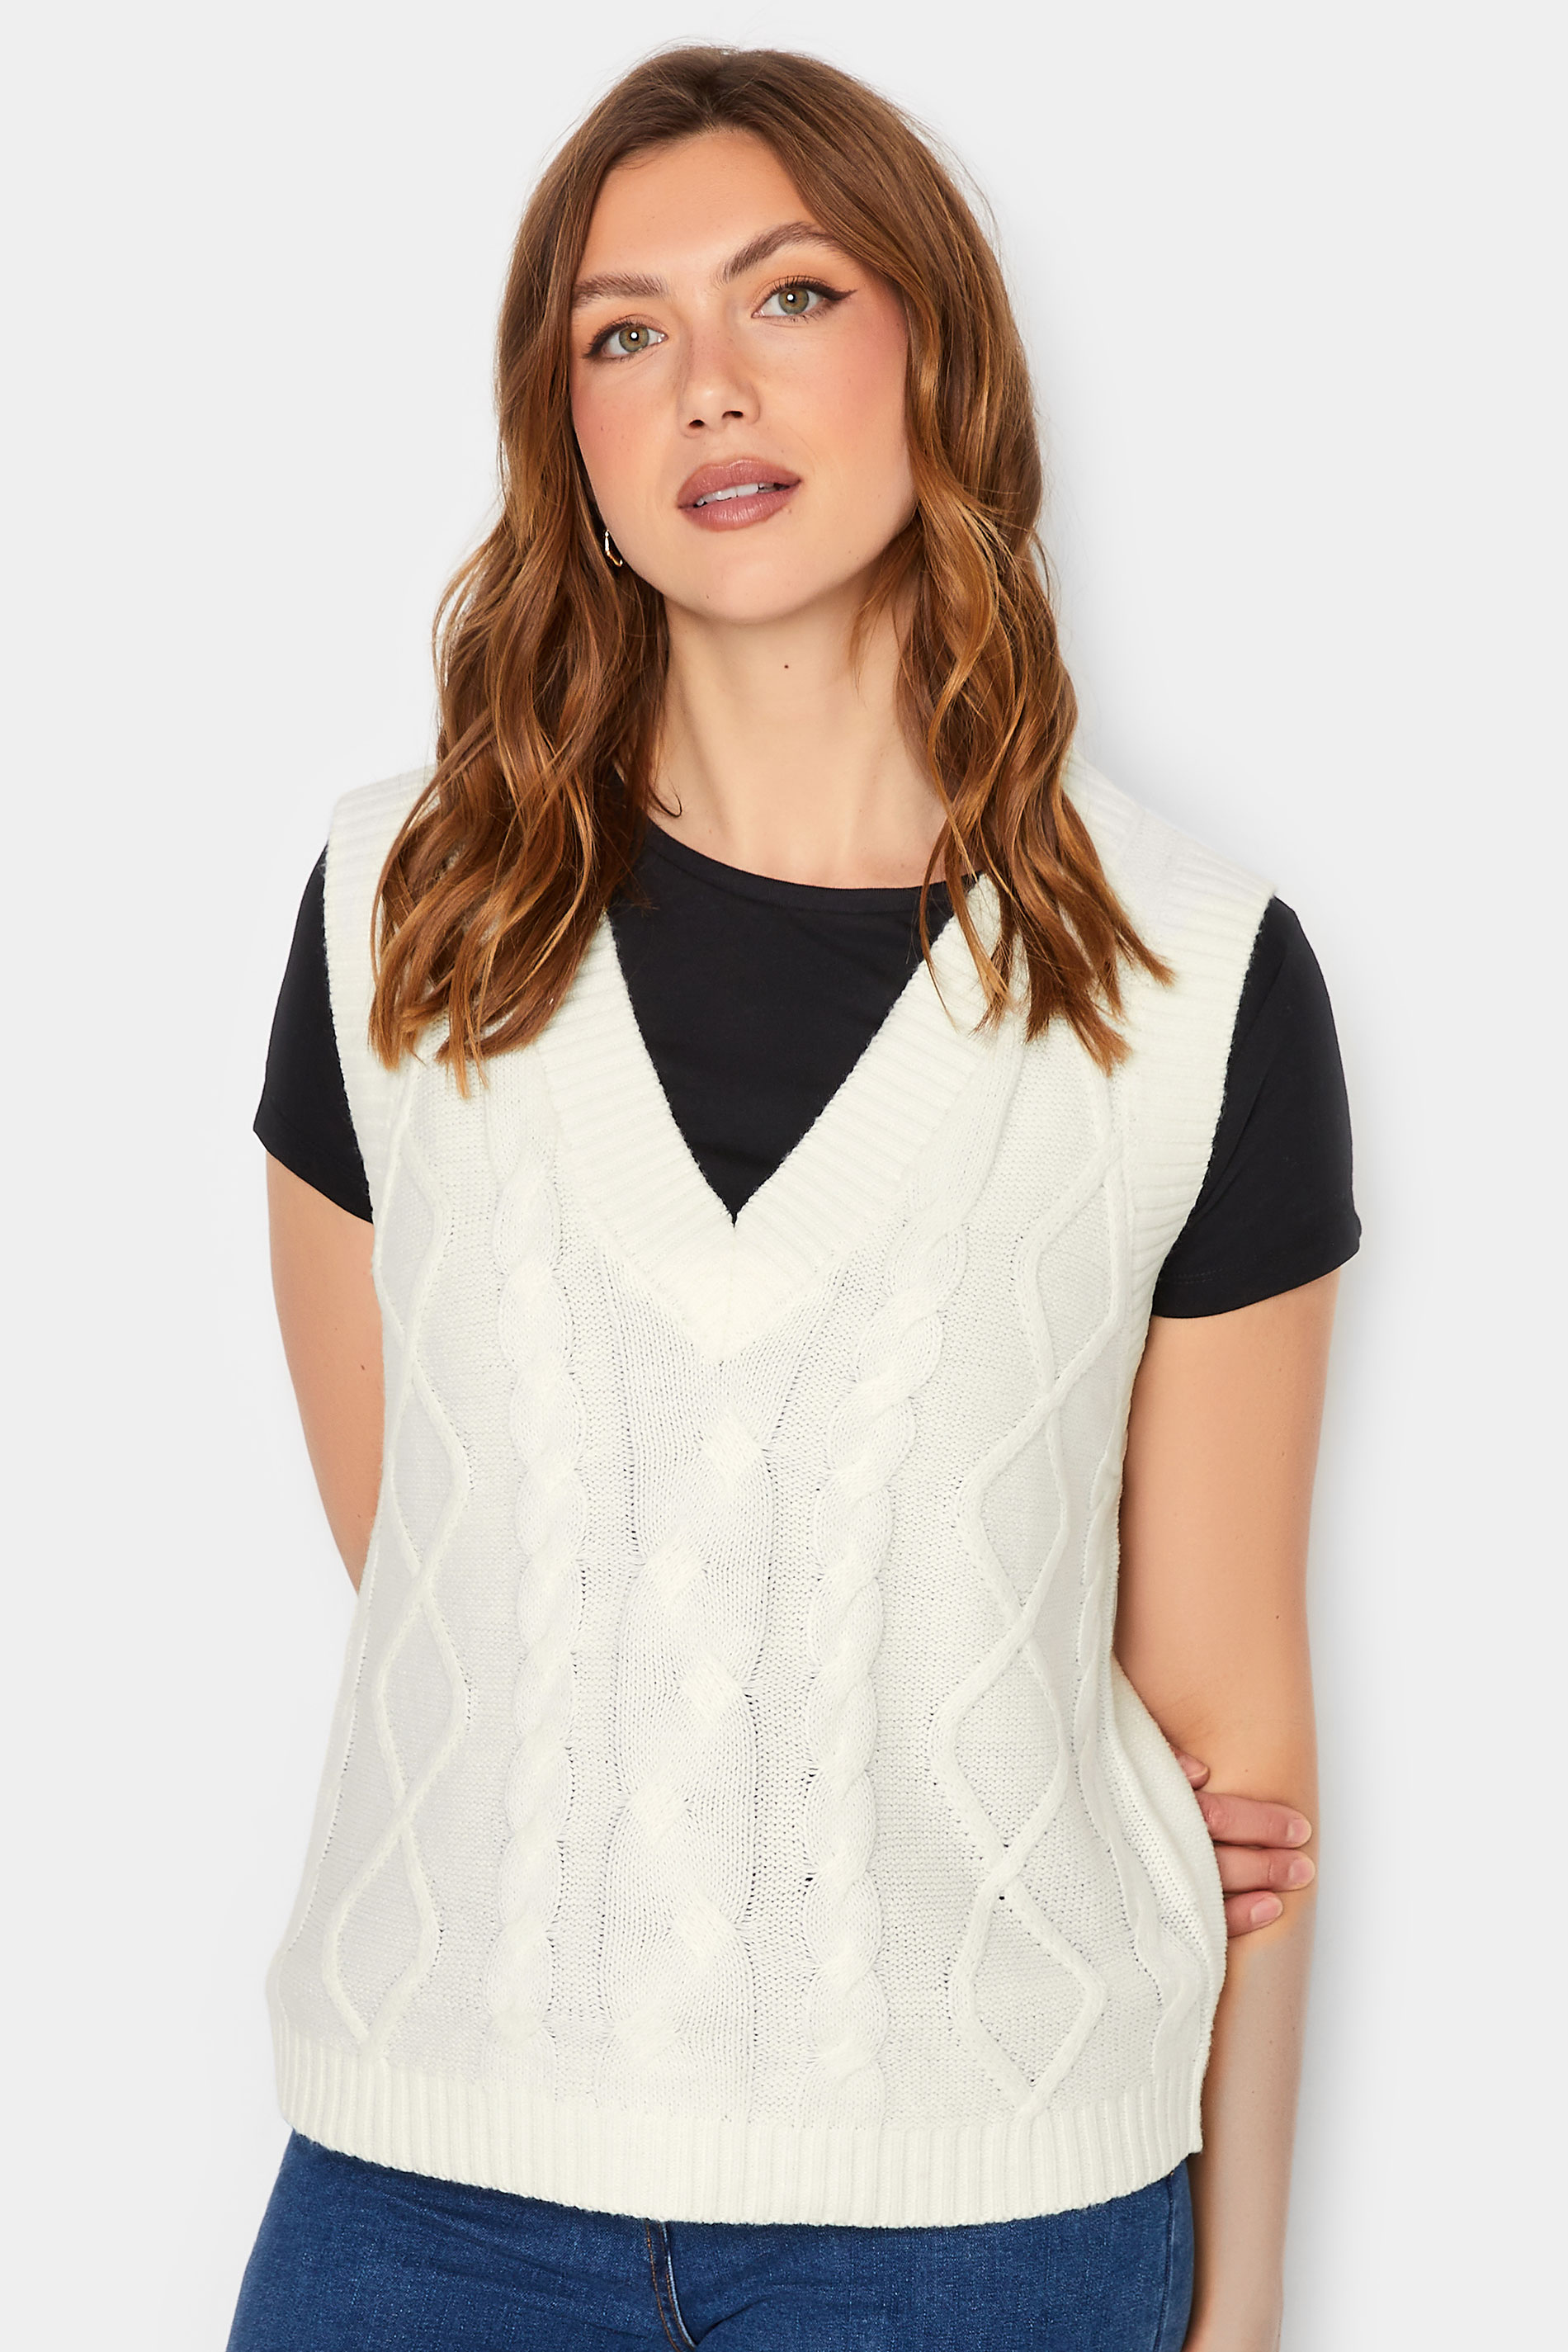 LTS Tall Women's White Cable Knit Sweater Vest Top | Long Tall Sally 1